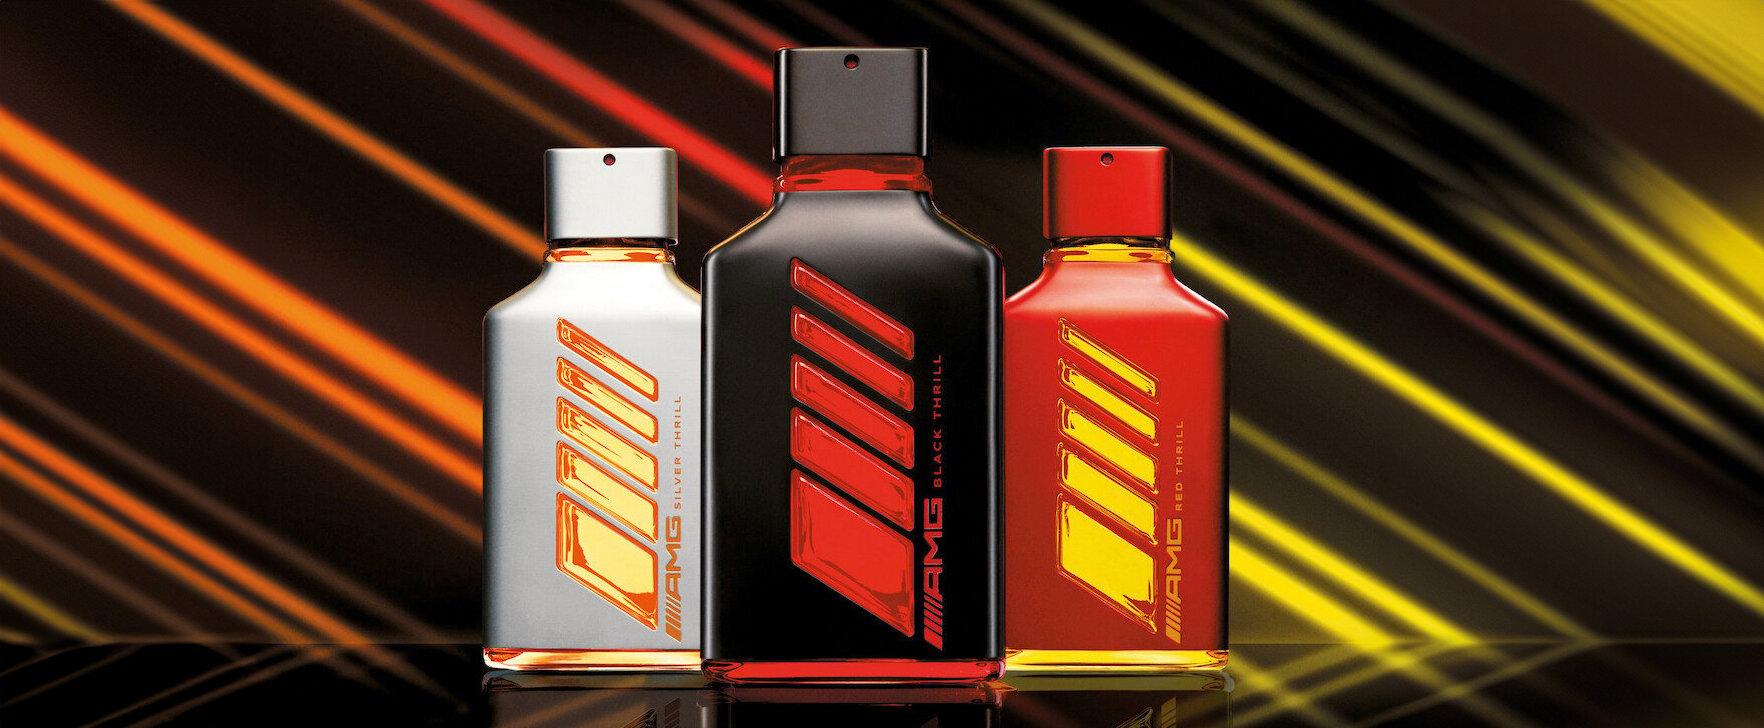 An Ode To High-Performance Vehicles: The New "Thrill" Fragrance Trilogy From AMG